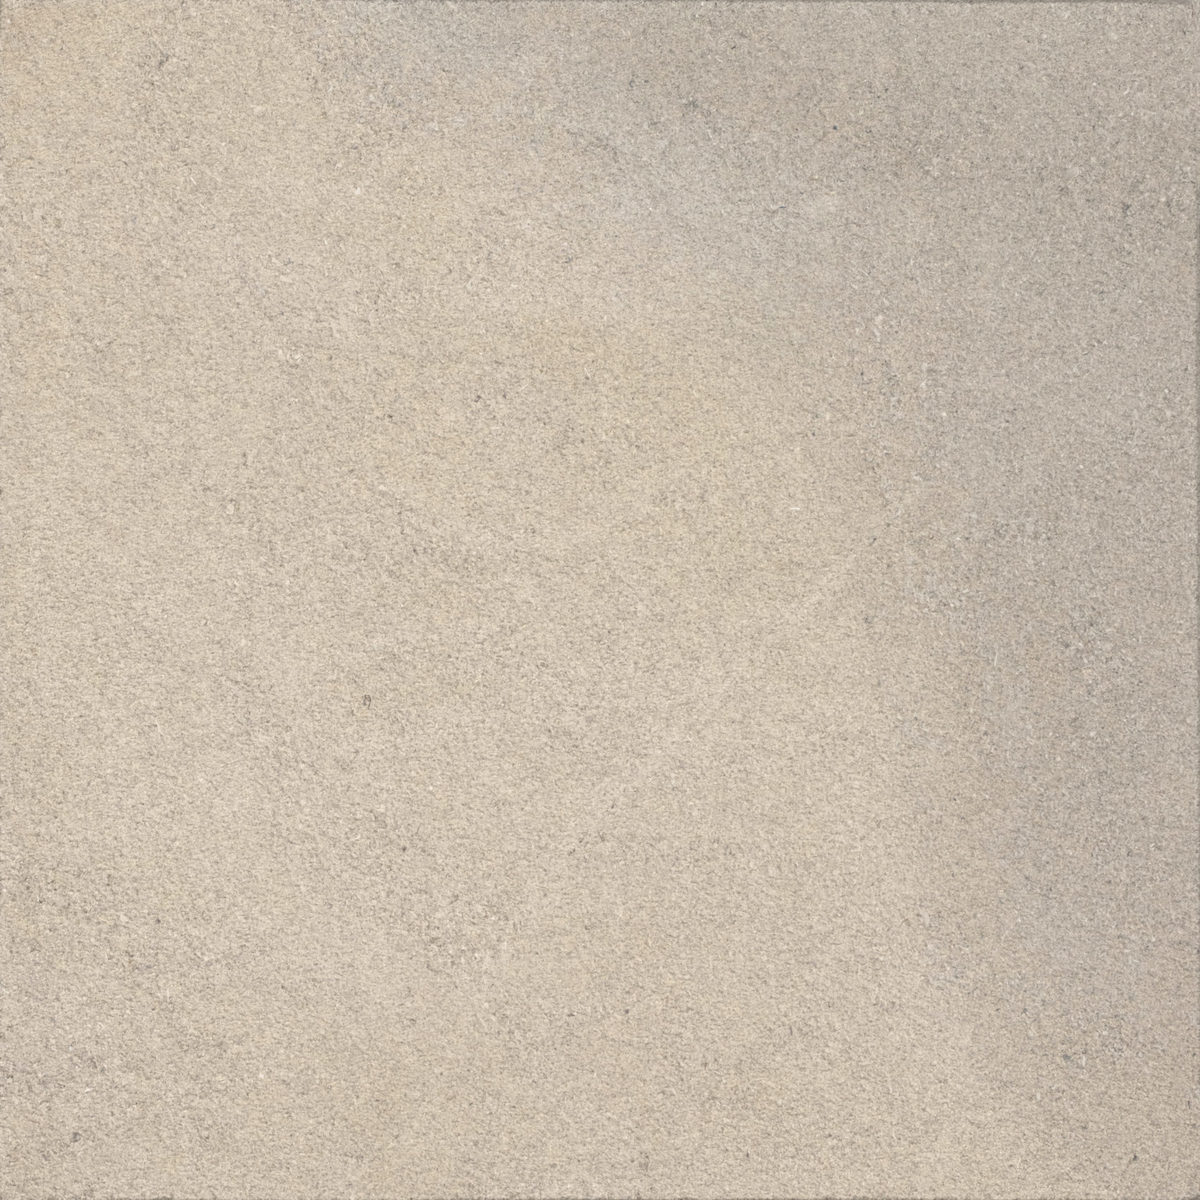 INDIANA LIMESTONE - FULL COLOR BLEND™